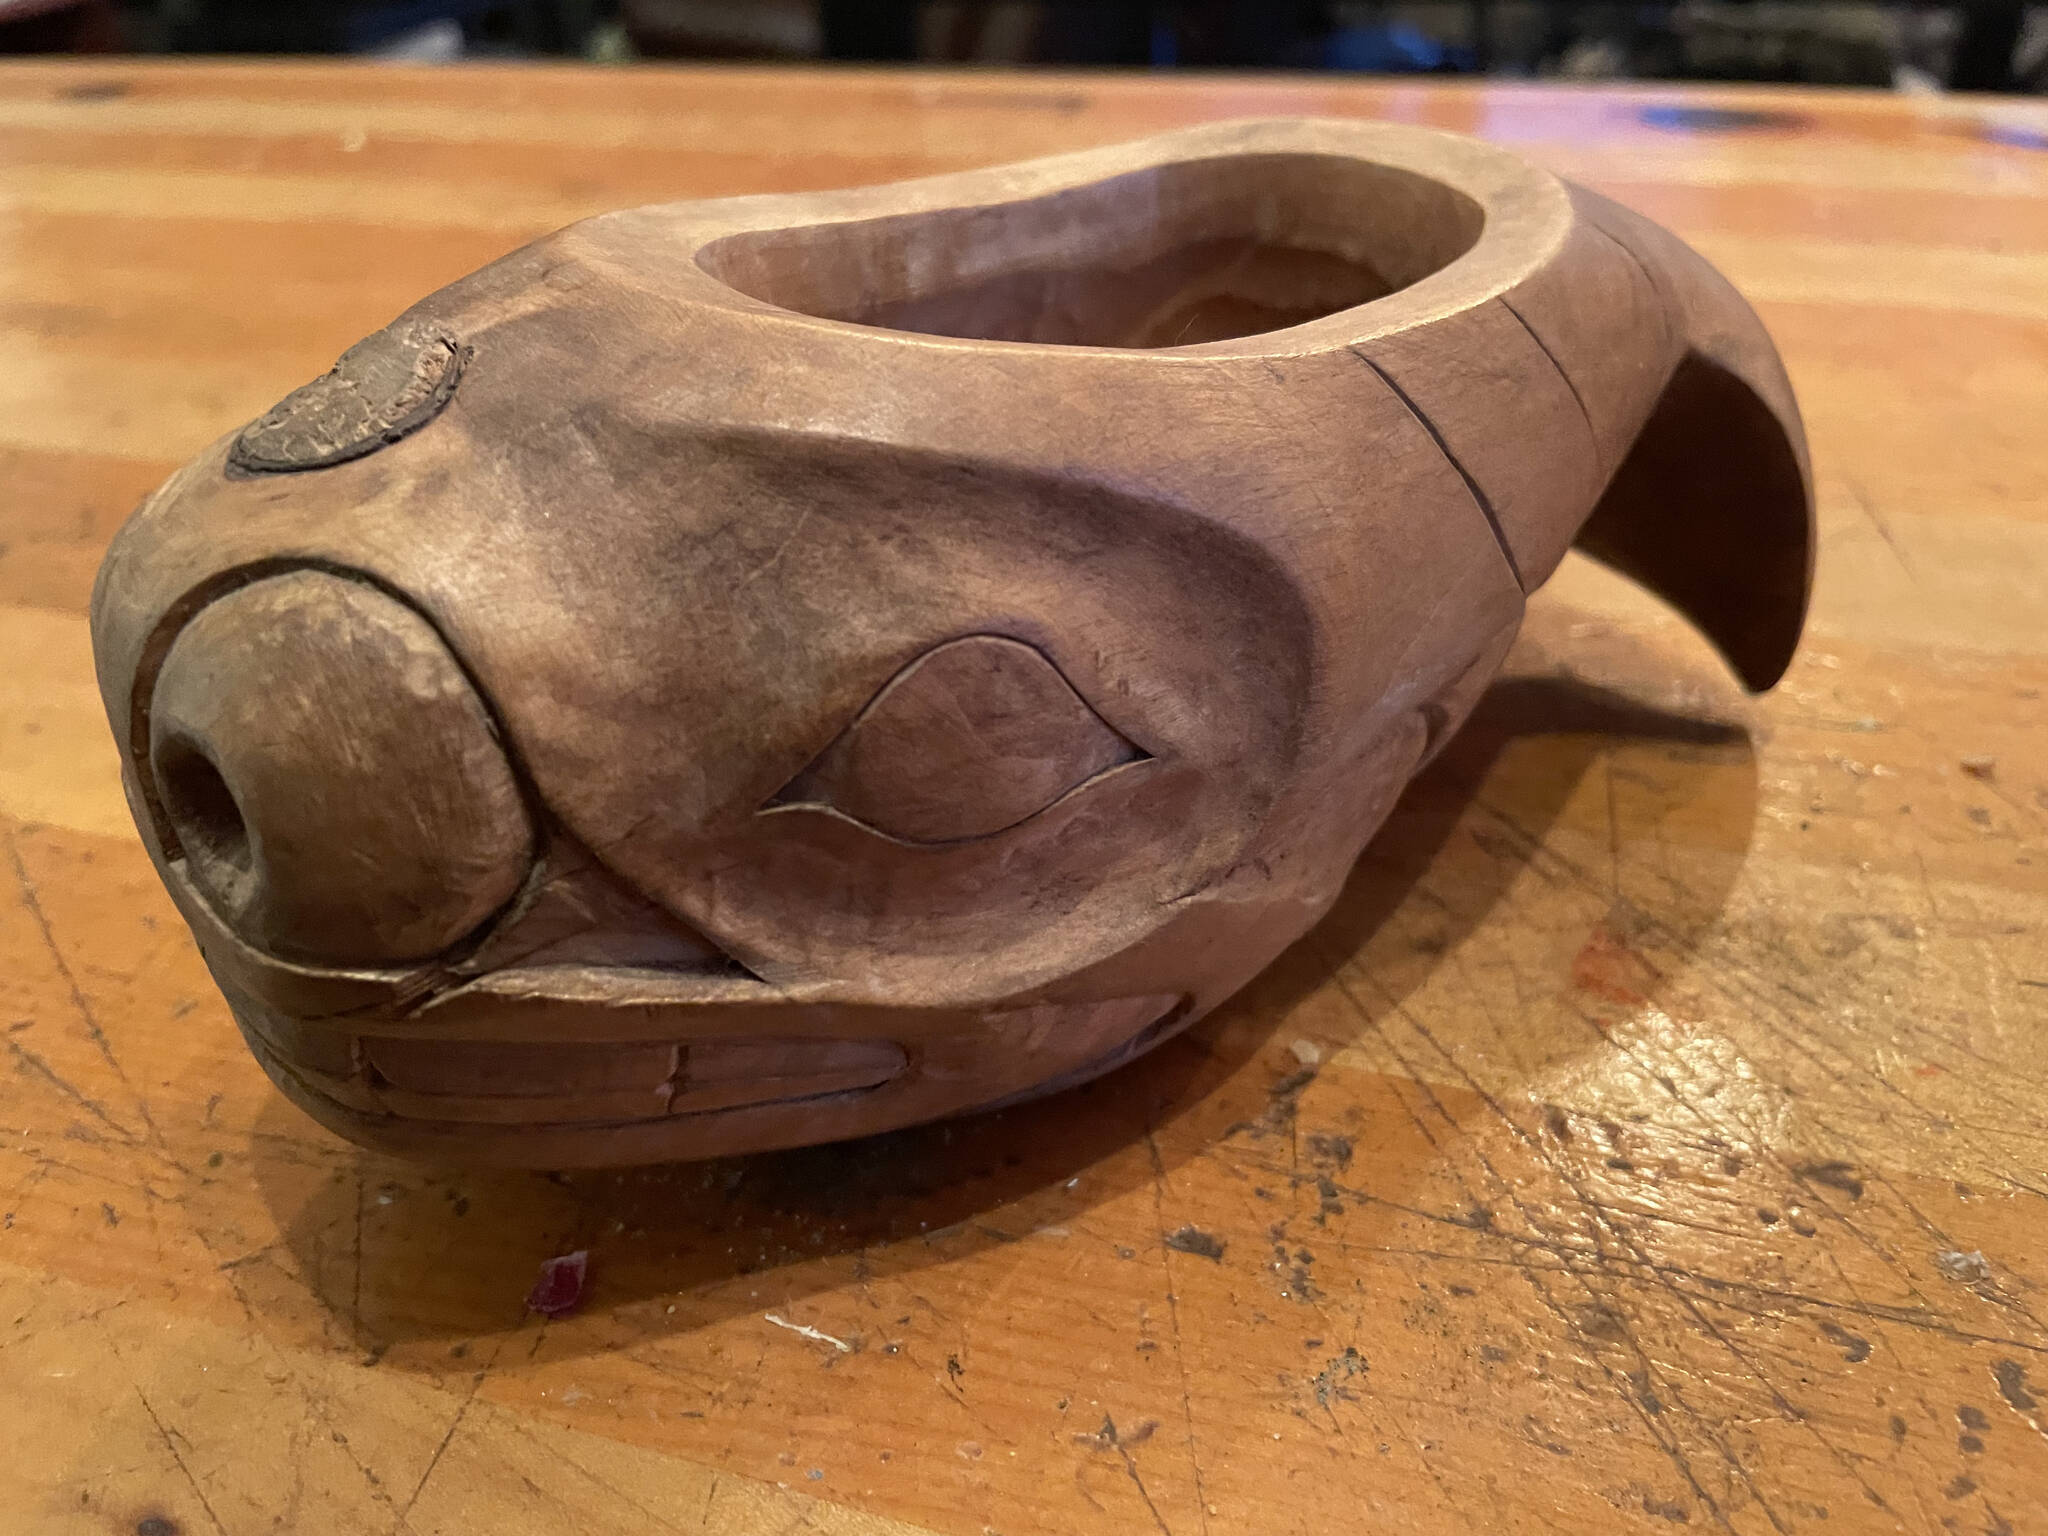 This carving by Jon Rowan has entered the realm of pricelessness thanks to the family memories and the carver himself. (Jeff Lund / For the Juneau Empire)